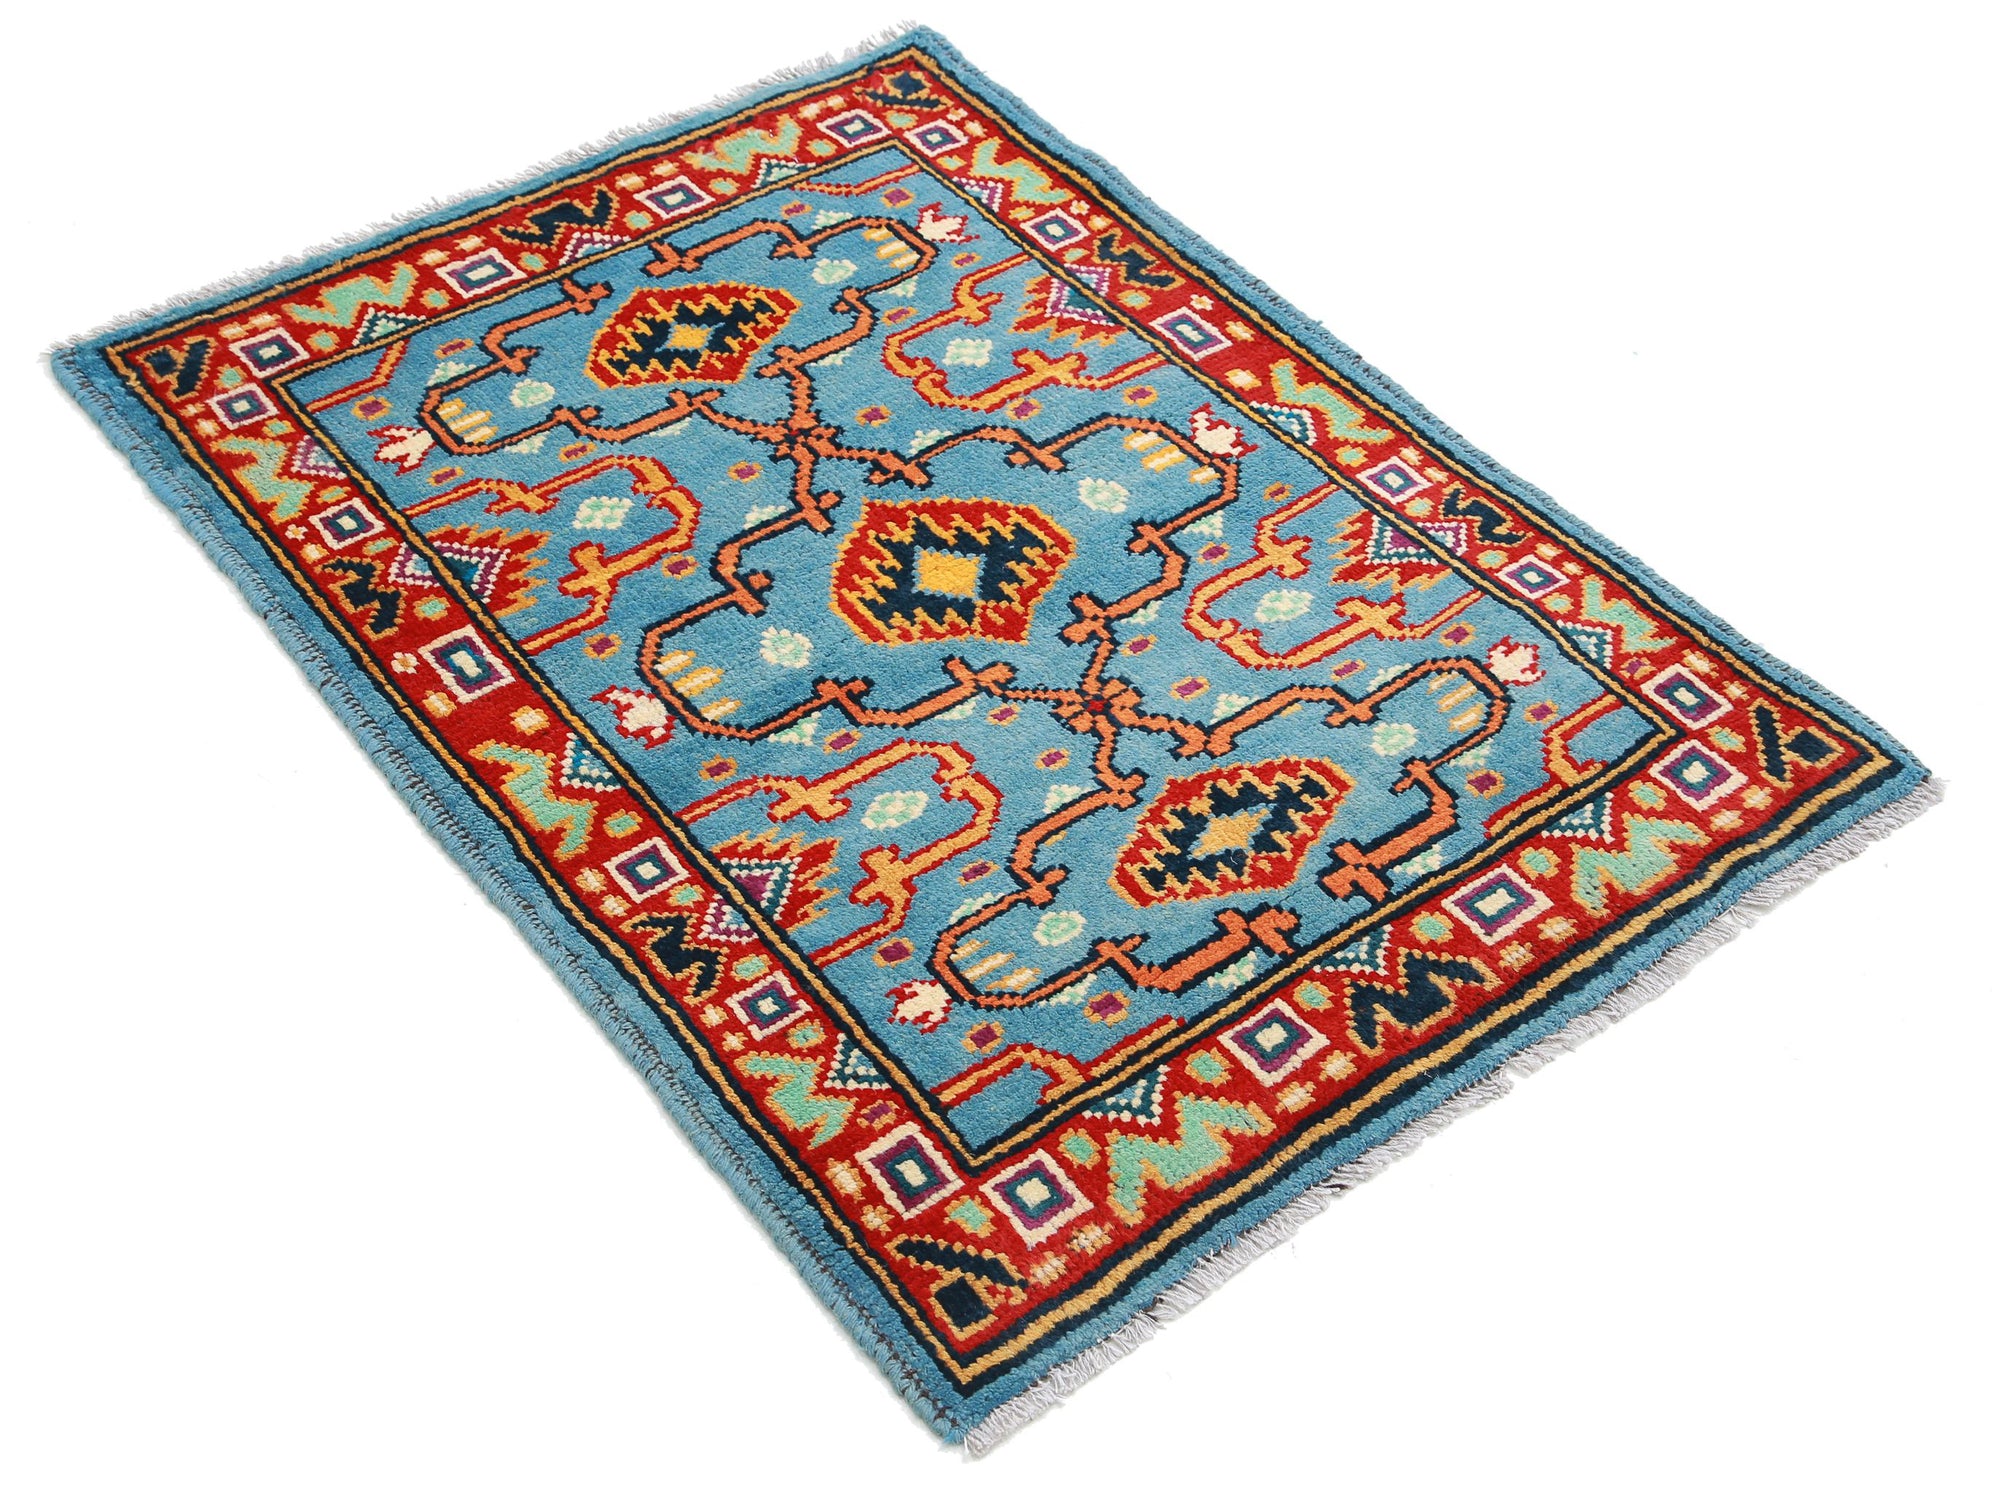 Revival-hand-knotted-qarghani-wool-rug-5014190-1.jpg